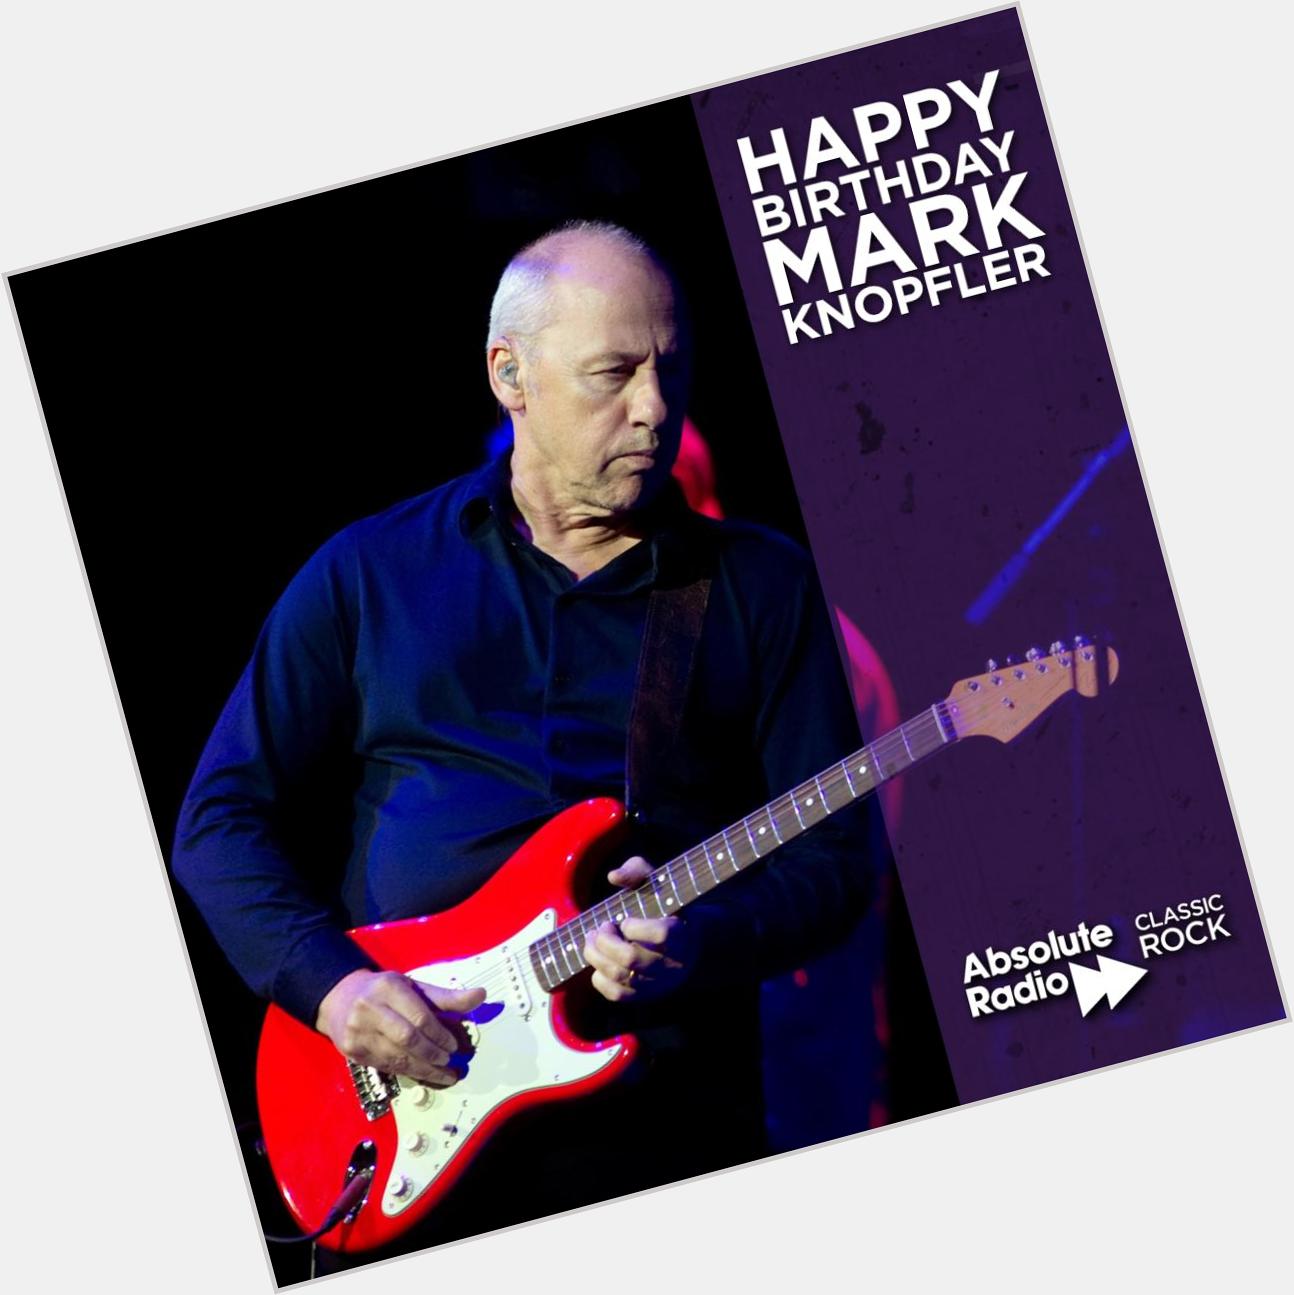 Happy birthday to Mark Knopfler! The Dire Straits guitarist, songwriter and producer, turns the big 7-0! 